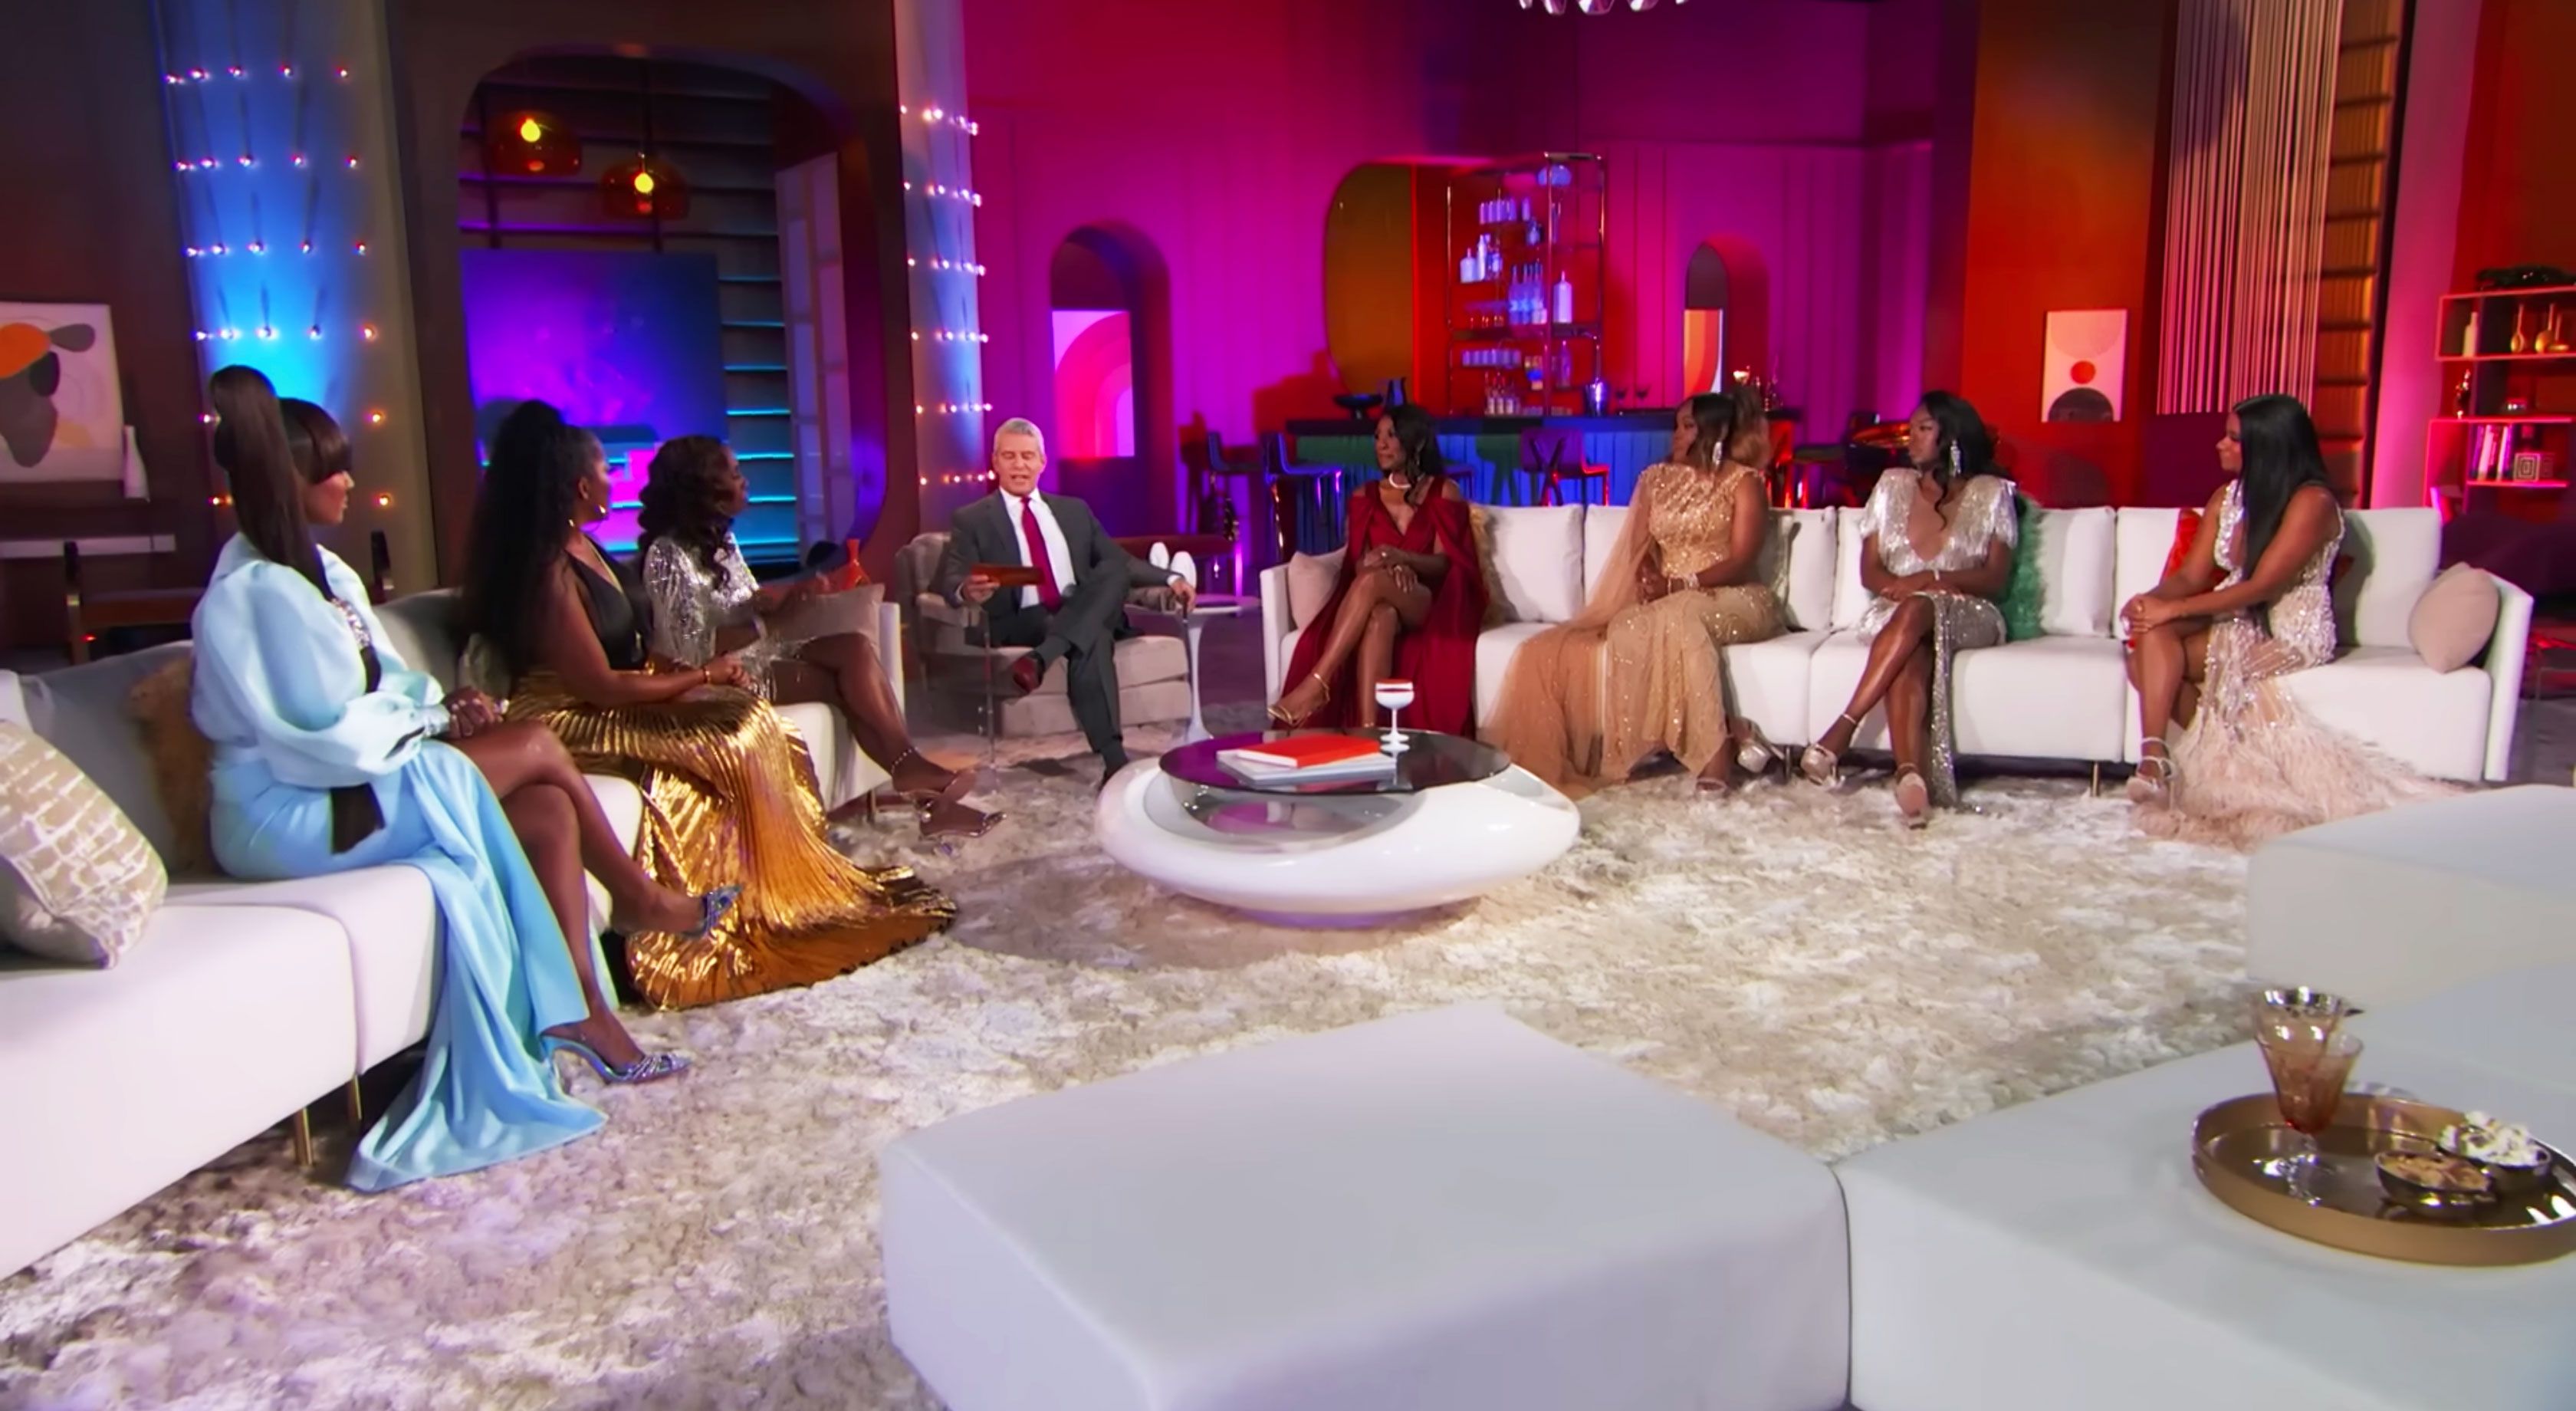 Married to Medicines Reunion Proves Its Bravos Hidden image